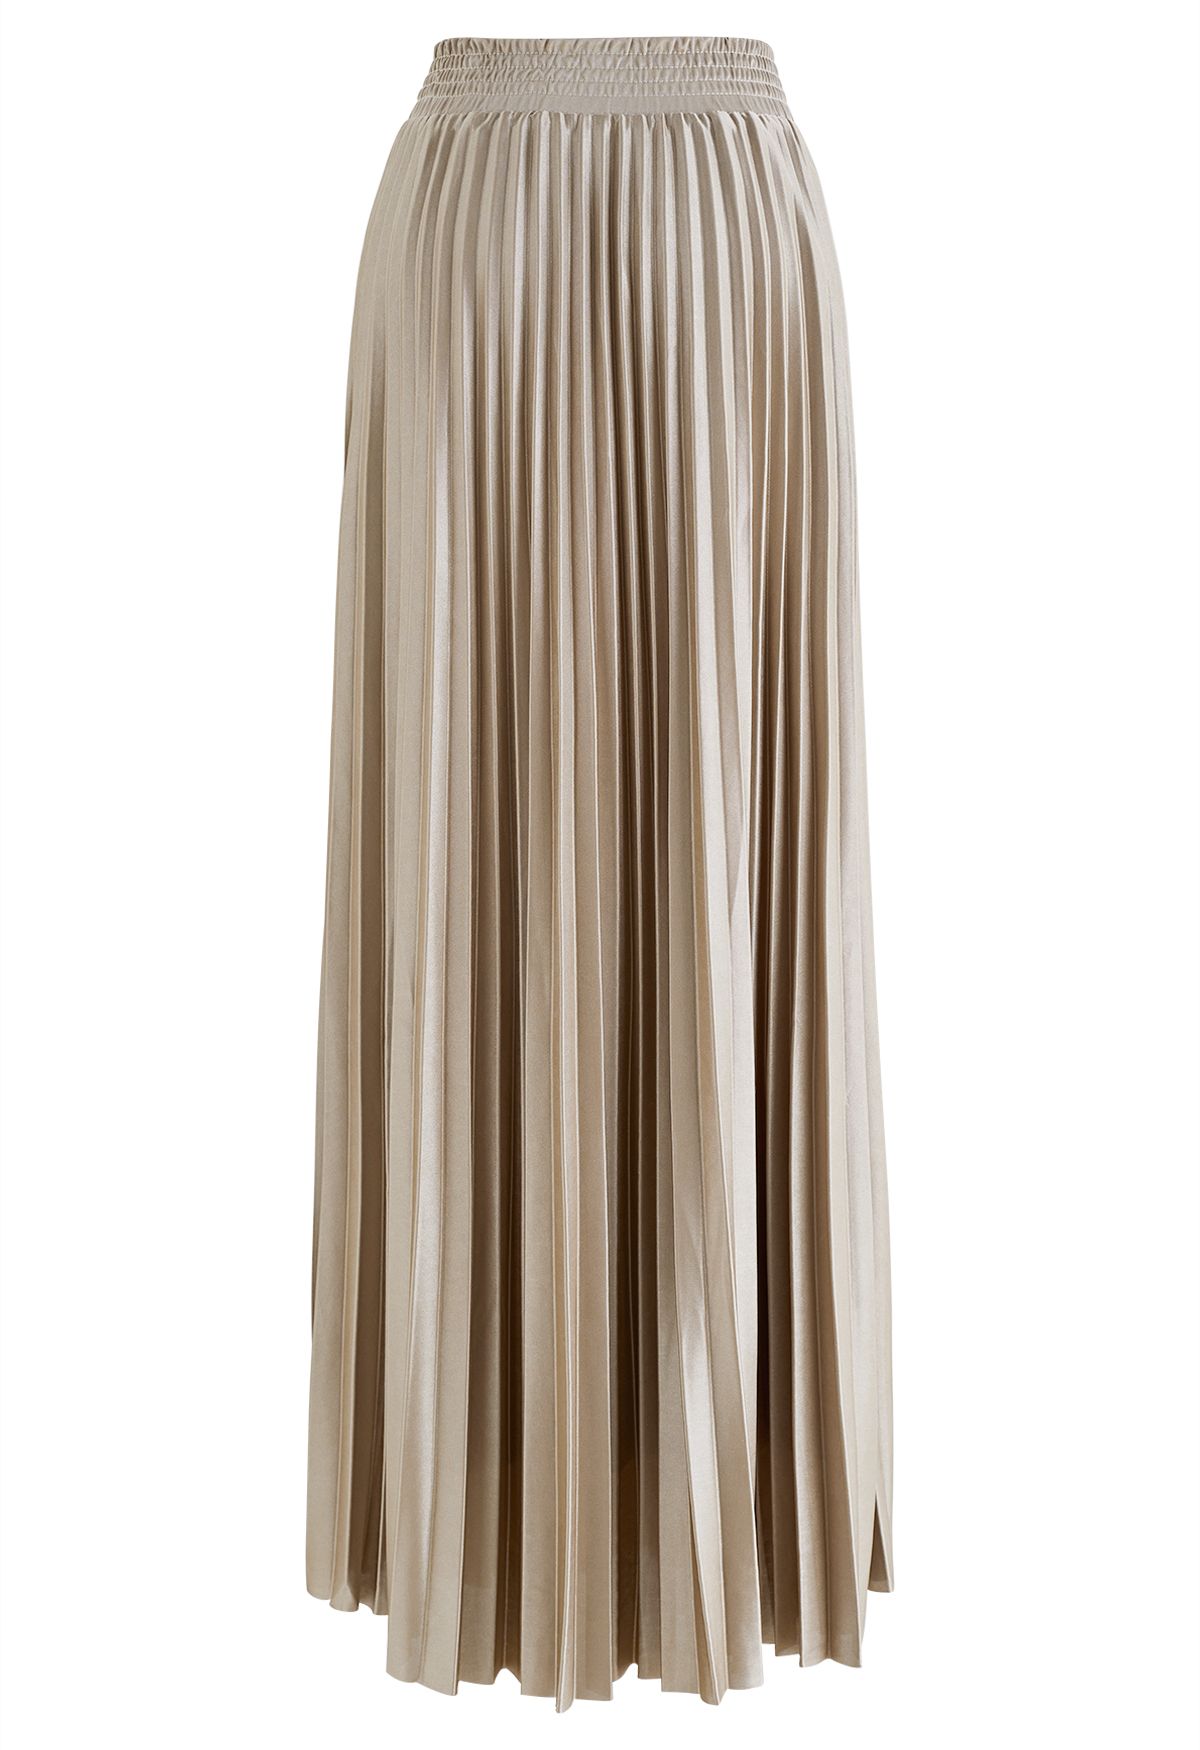 Glossy Pleated Maxi Skirt in Light Tan - Retro, Indie and Unique Fashion